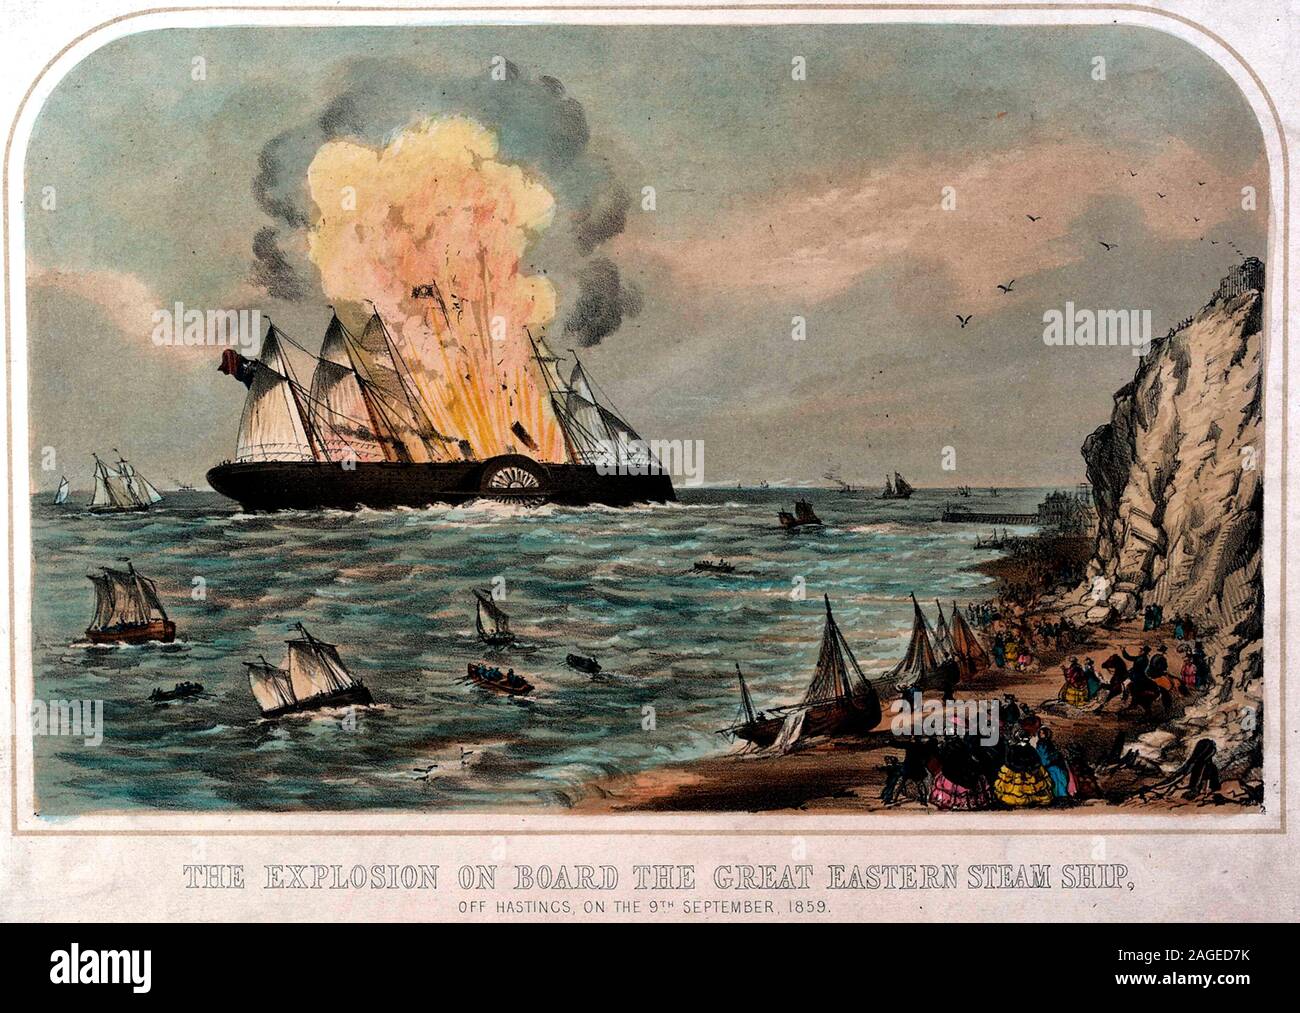 The Explosion on board the Great Eastern Steam Ship, off Hastings, on the 9th September, 1859. The 'Great Eastern' left the Thames on 7 September 1859. Two days later, when she was passing the south coast, a terrific explosion occurred, caused by an absence of safety valves for the paddle engine boilers. Six firemen were killed and the grand saloon and several cabins were wrecked. However, it is a testament to the solidity of the ship's construction that it survived the blast. Stock Photo